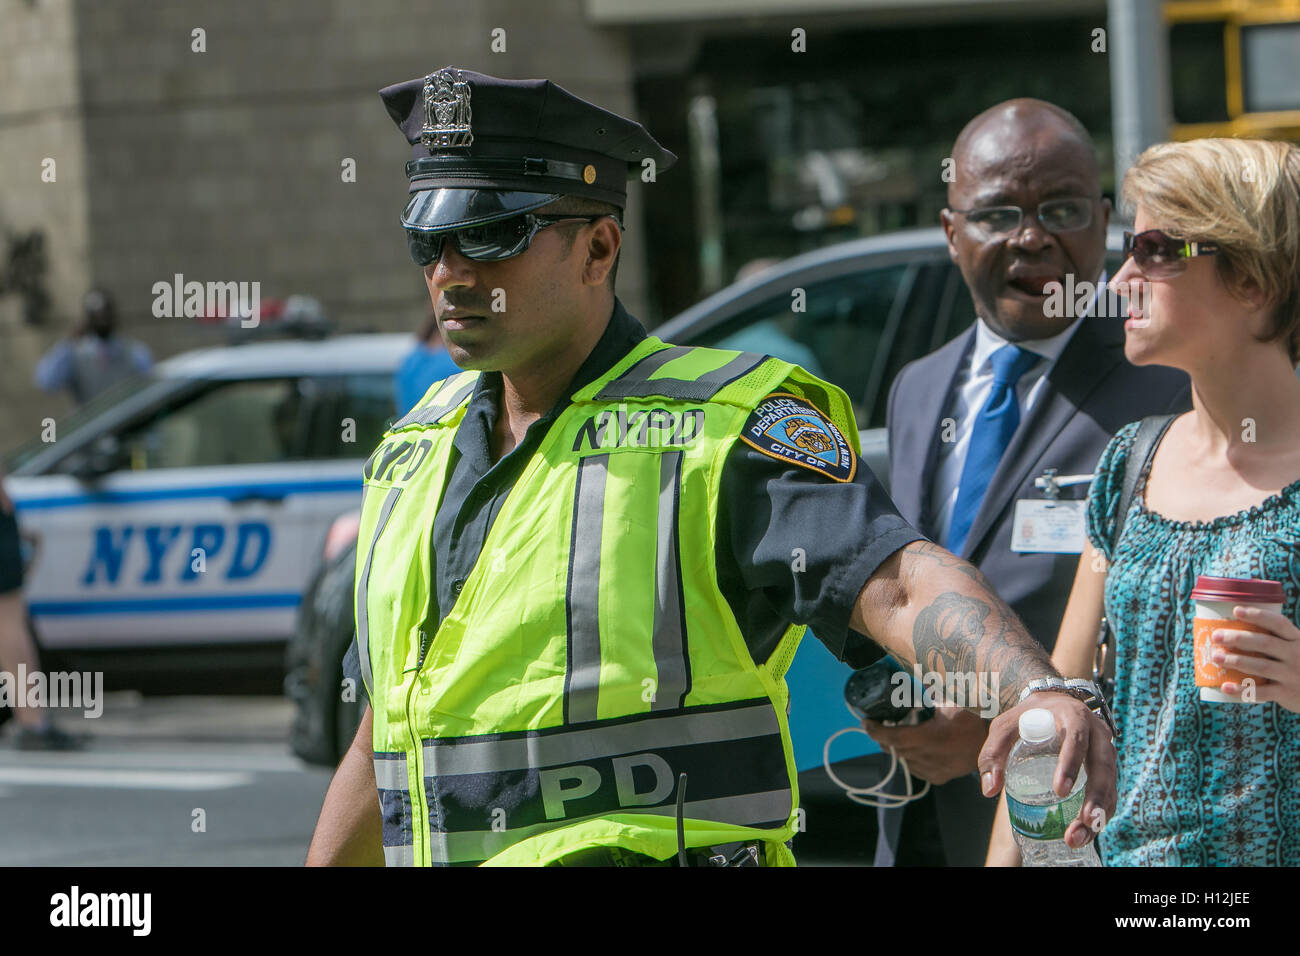 A policeman is directing traffic on the 2nd Avenue during the UN General Assembly. Stock Photo